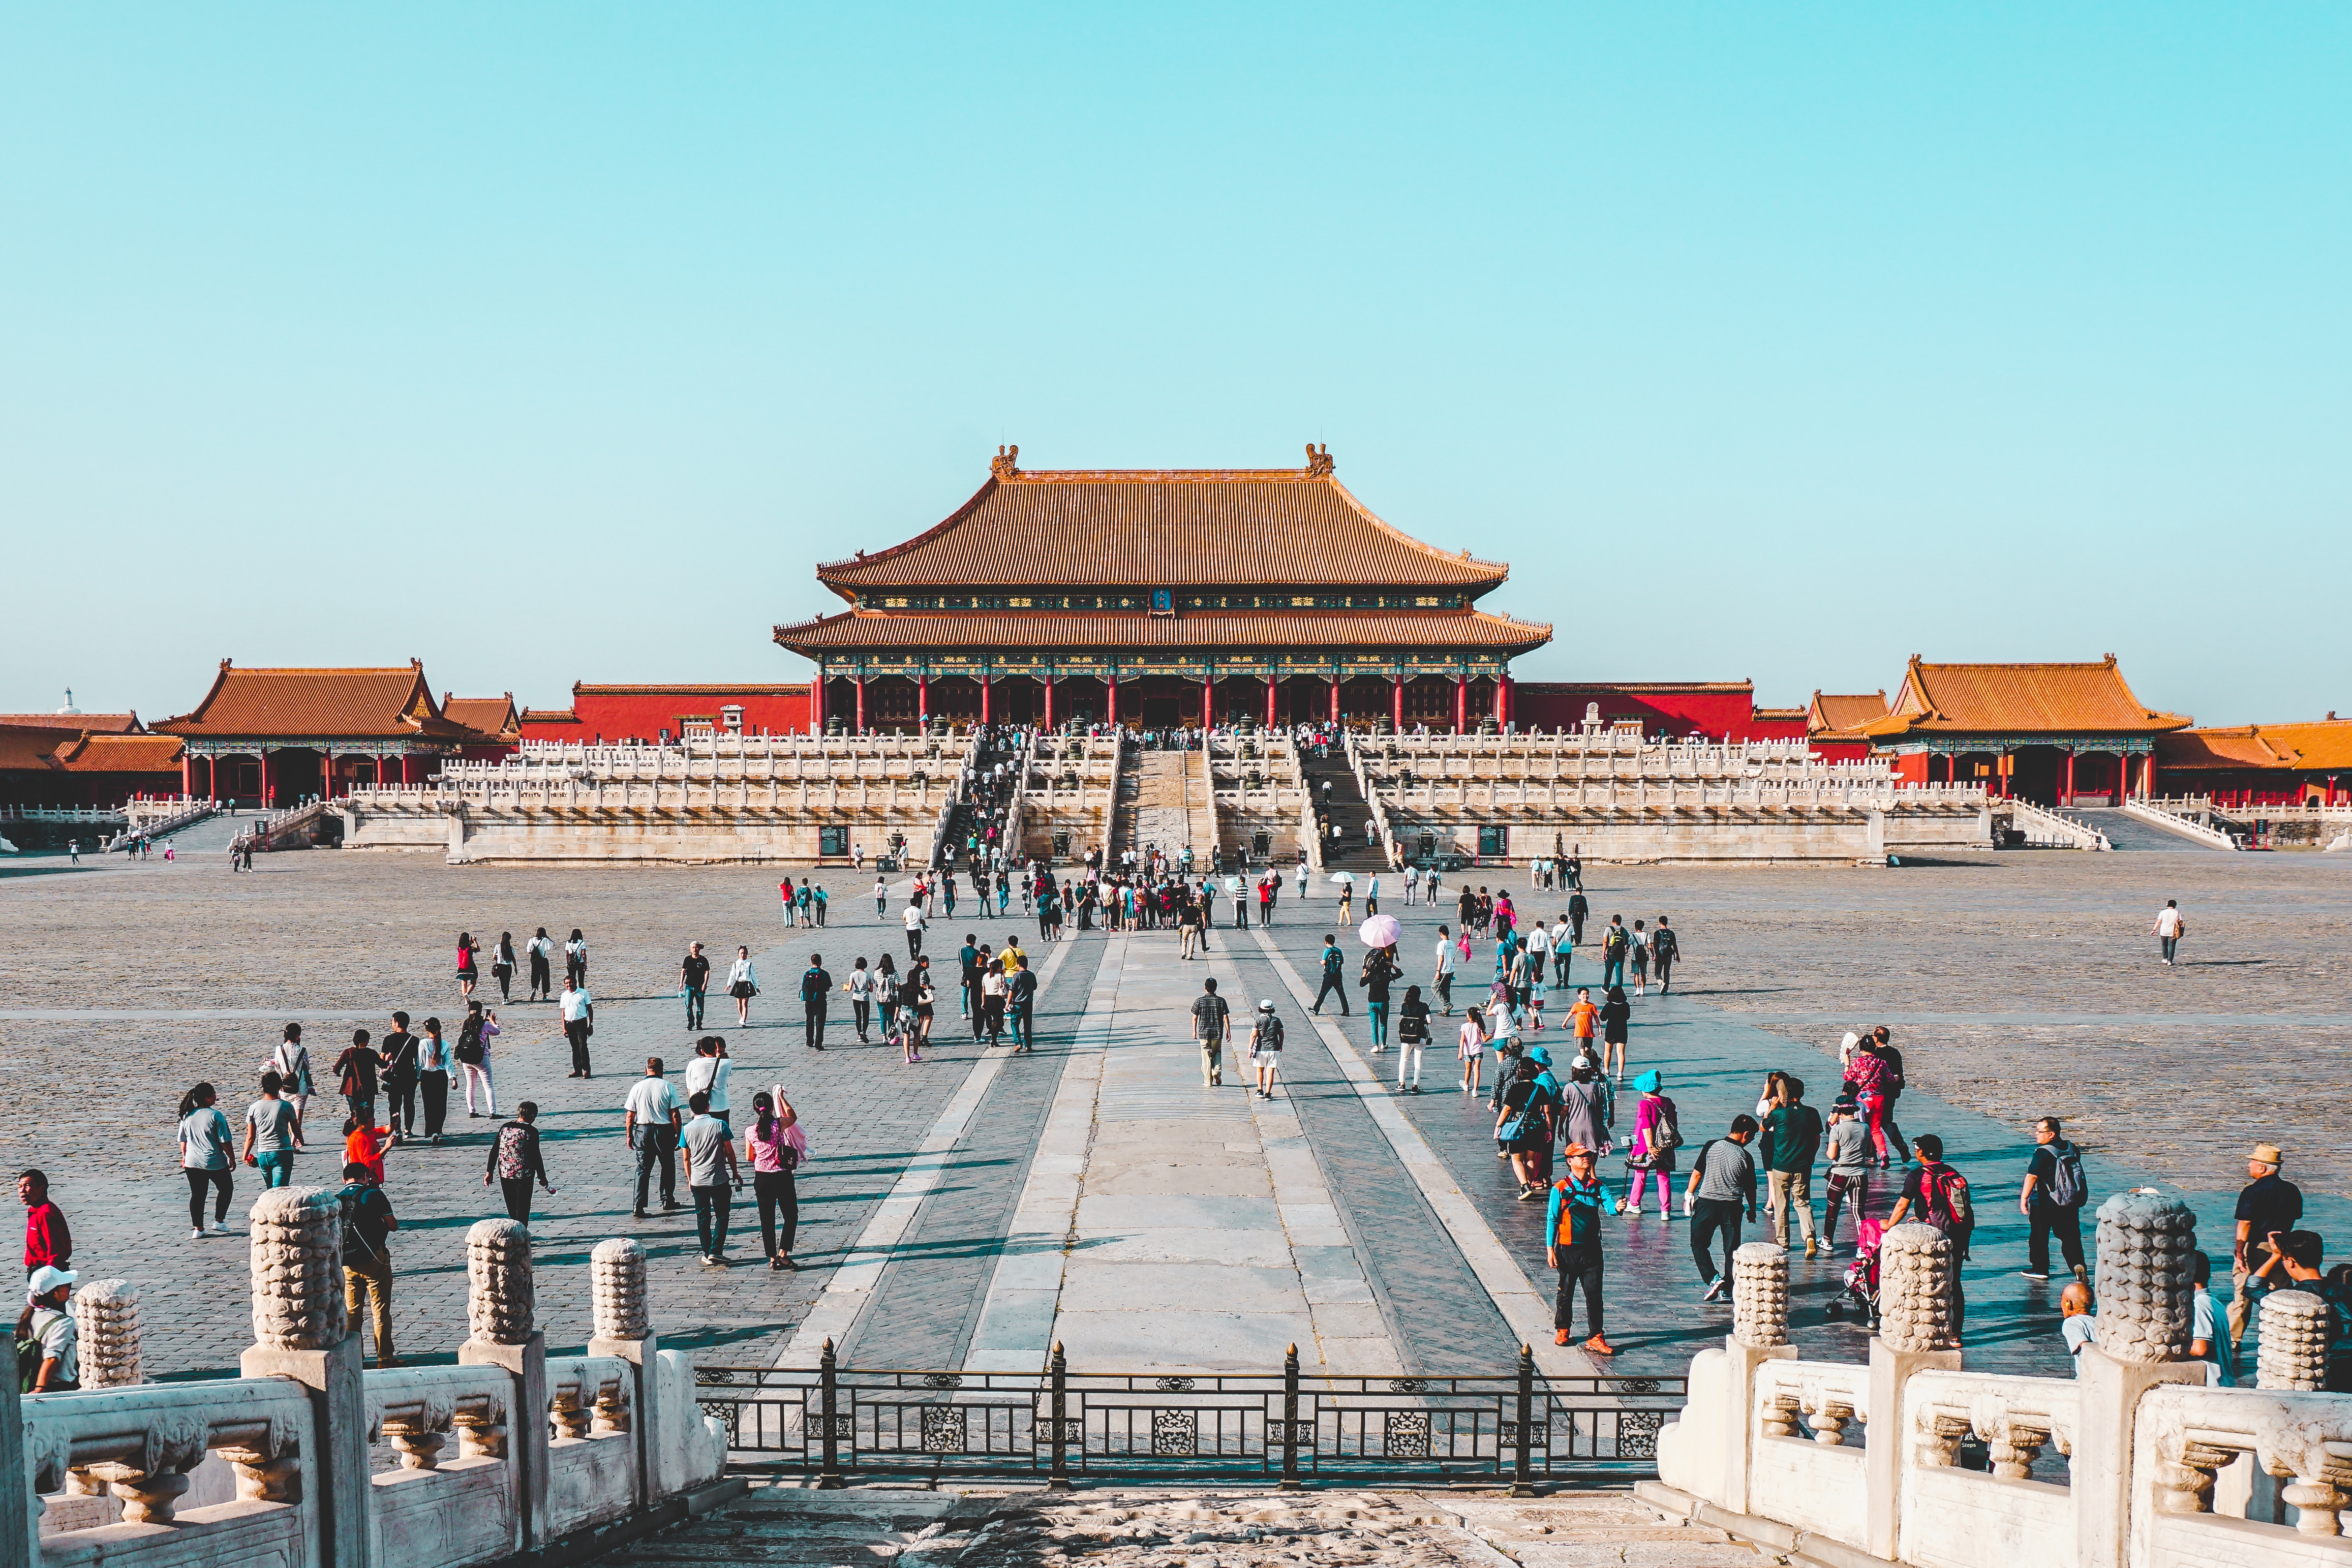 The forbidden city of China, Beijing